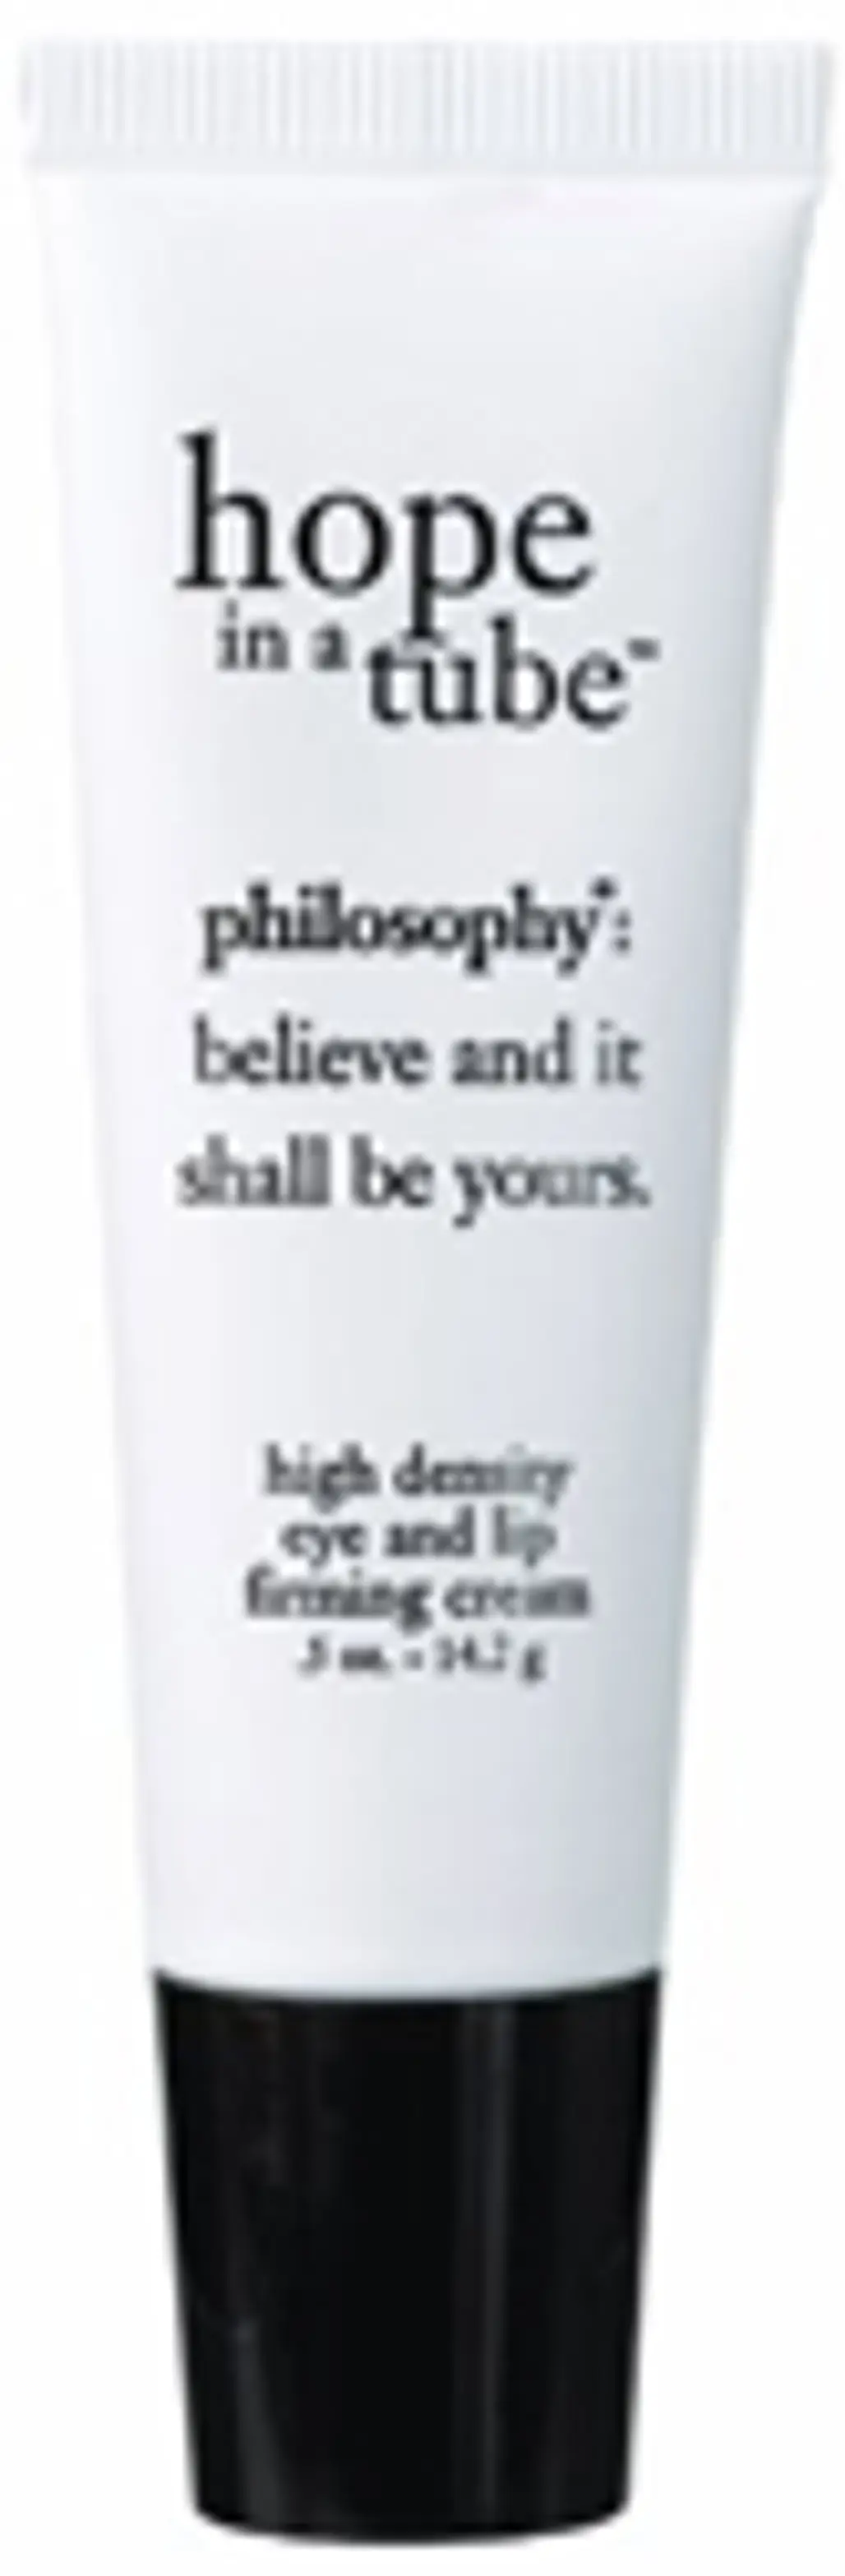 Philosophy Hope in a Tube Eye and Lip Contour Cream Tube